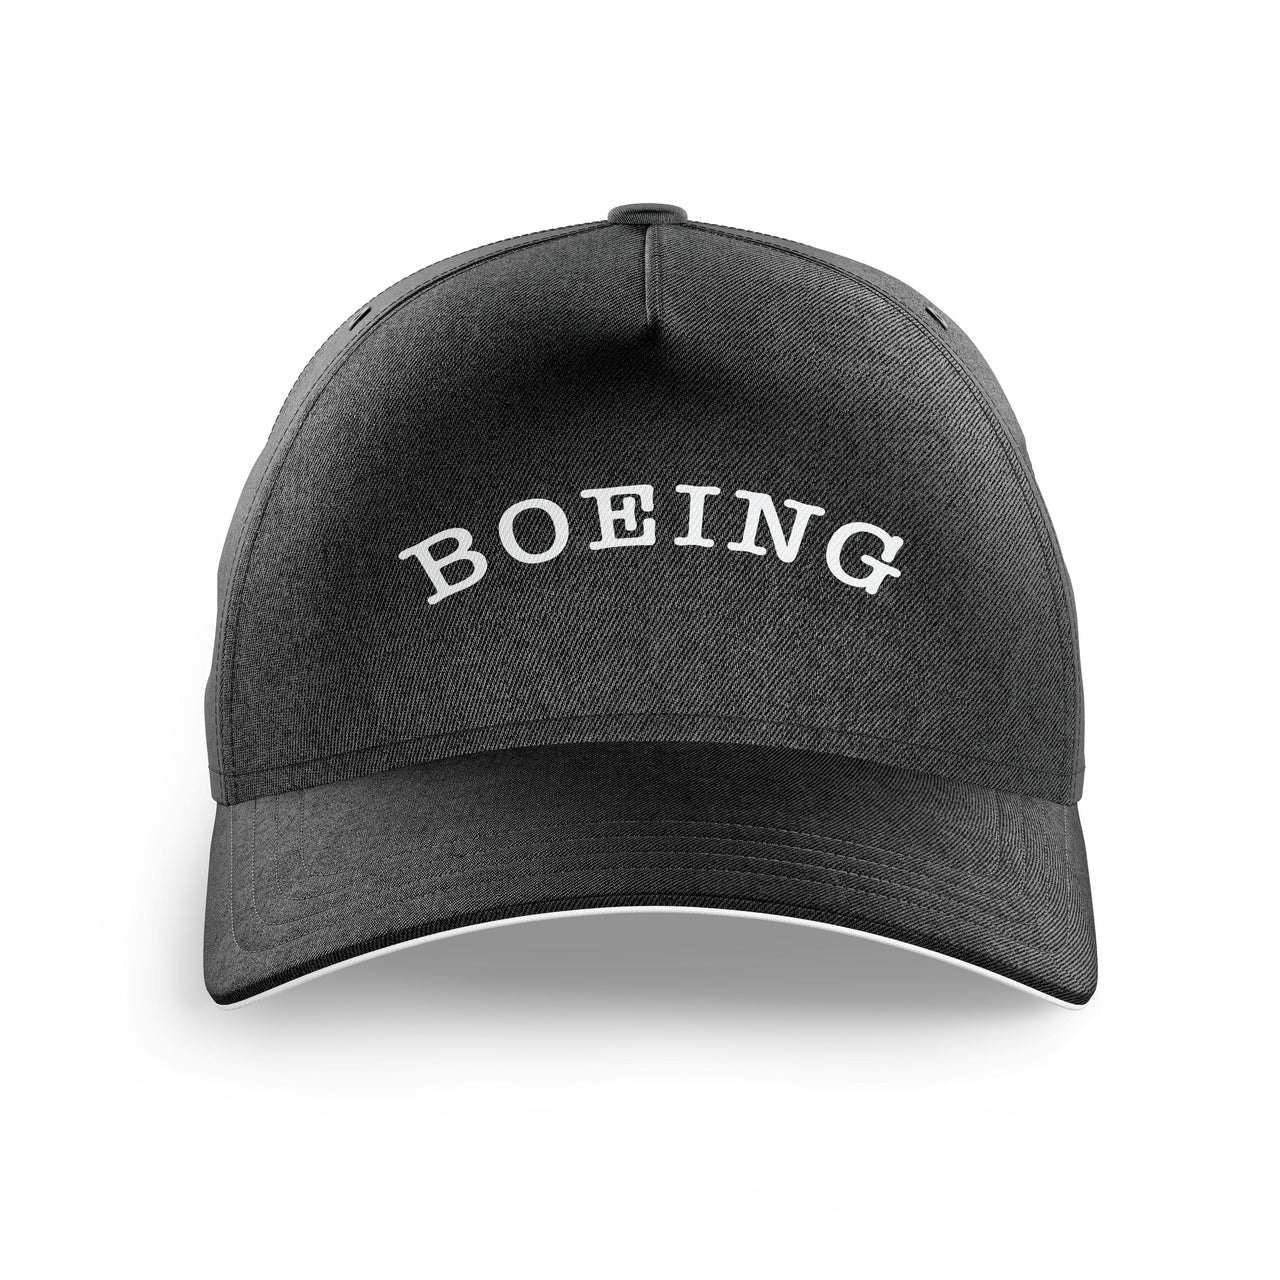 Special BOEING Text Printed Hats